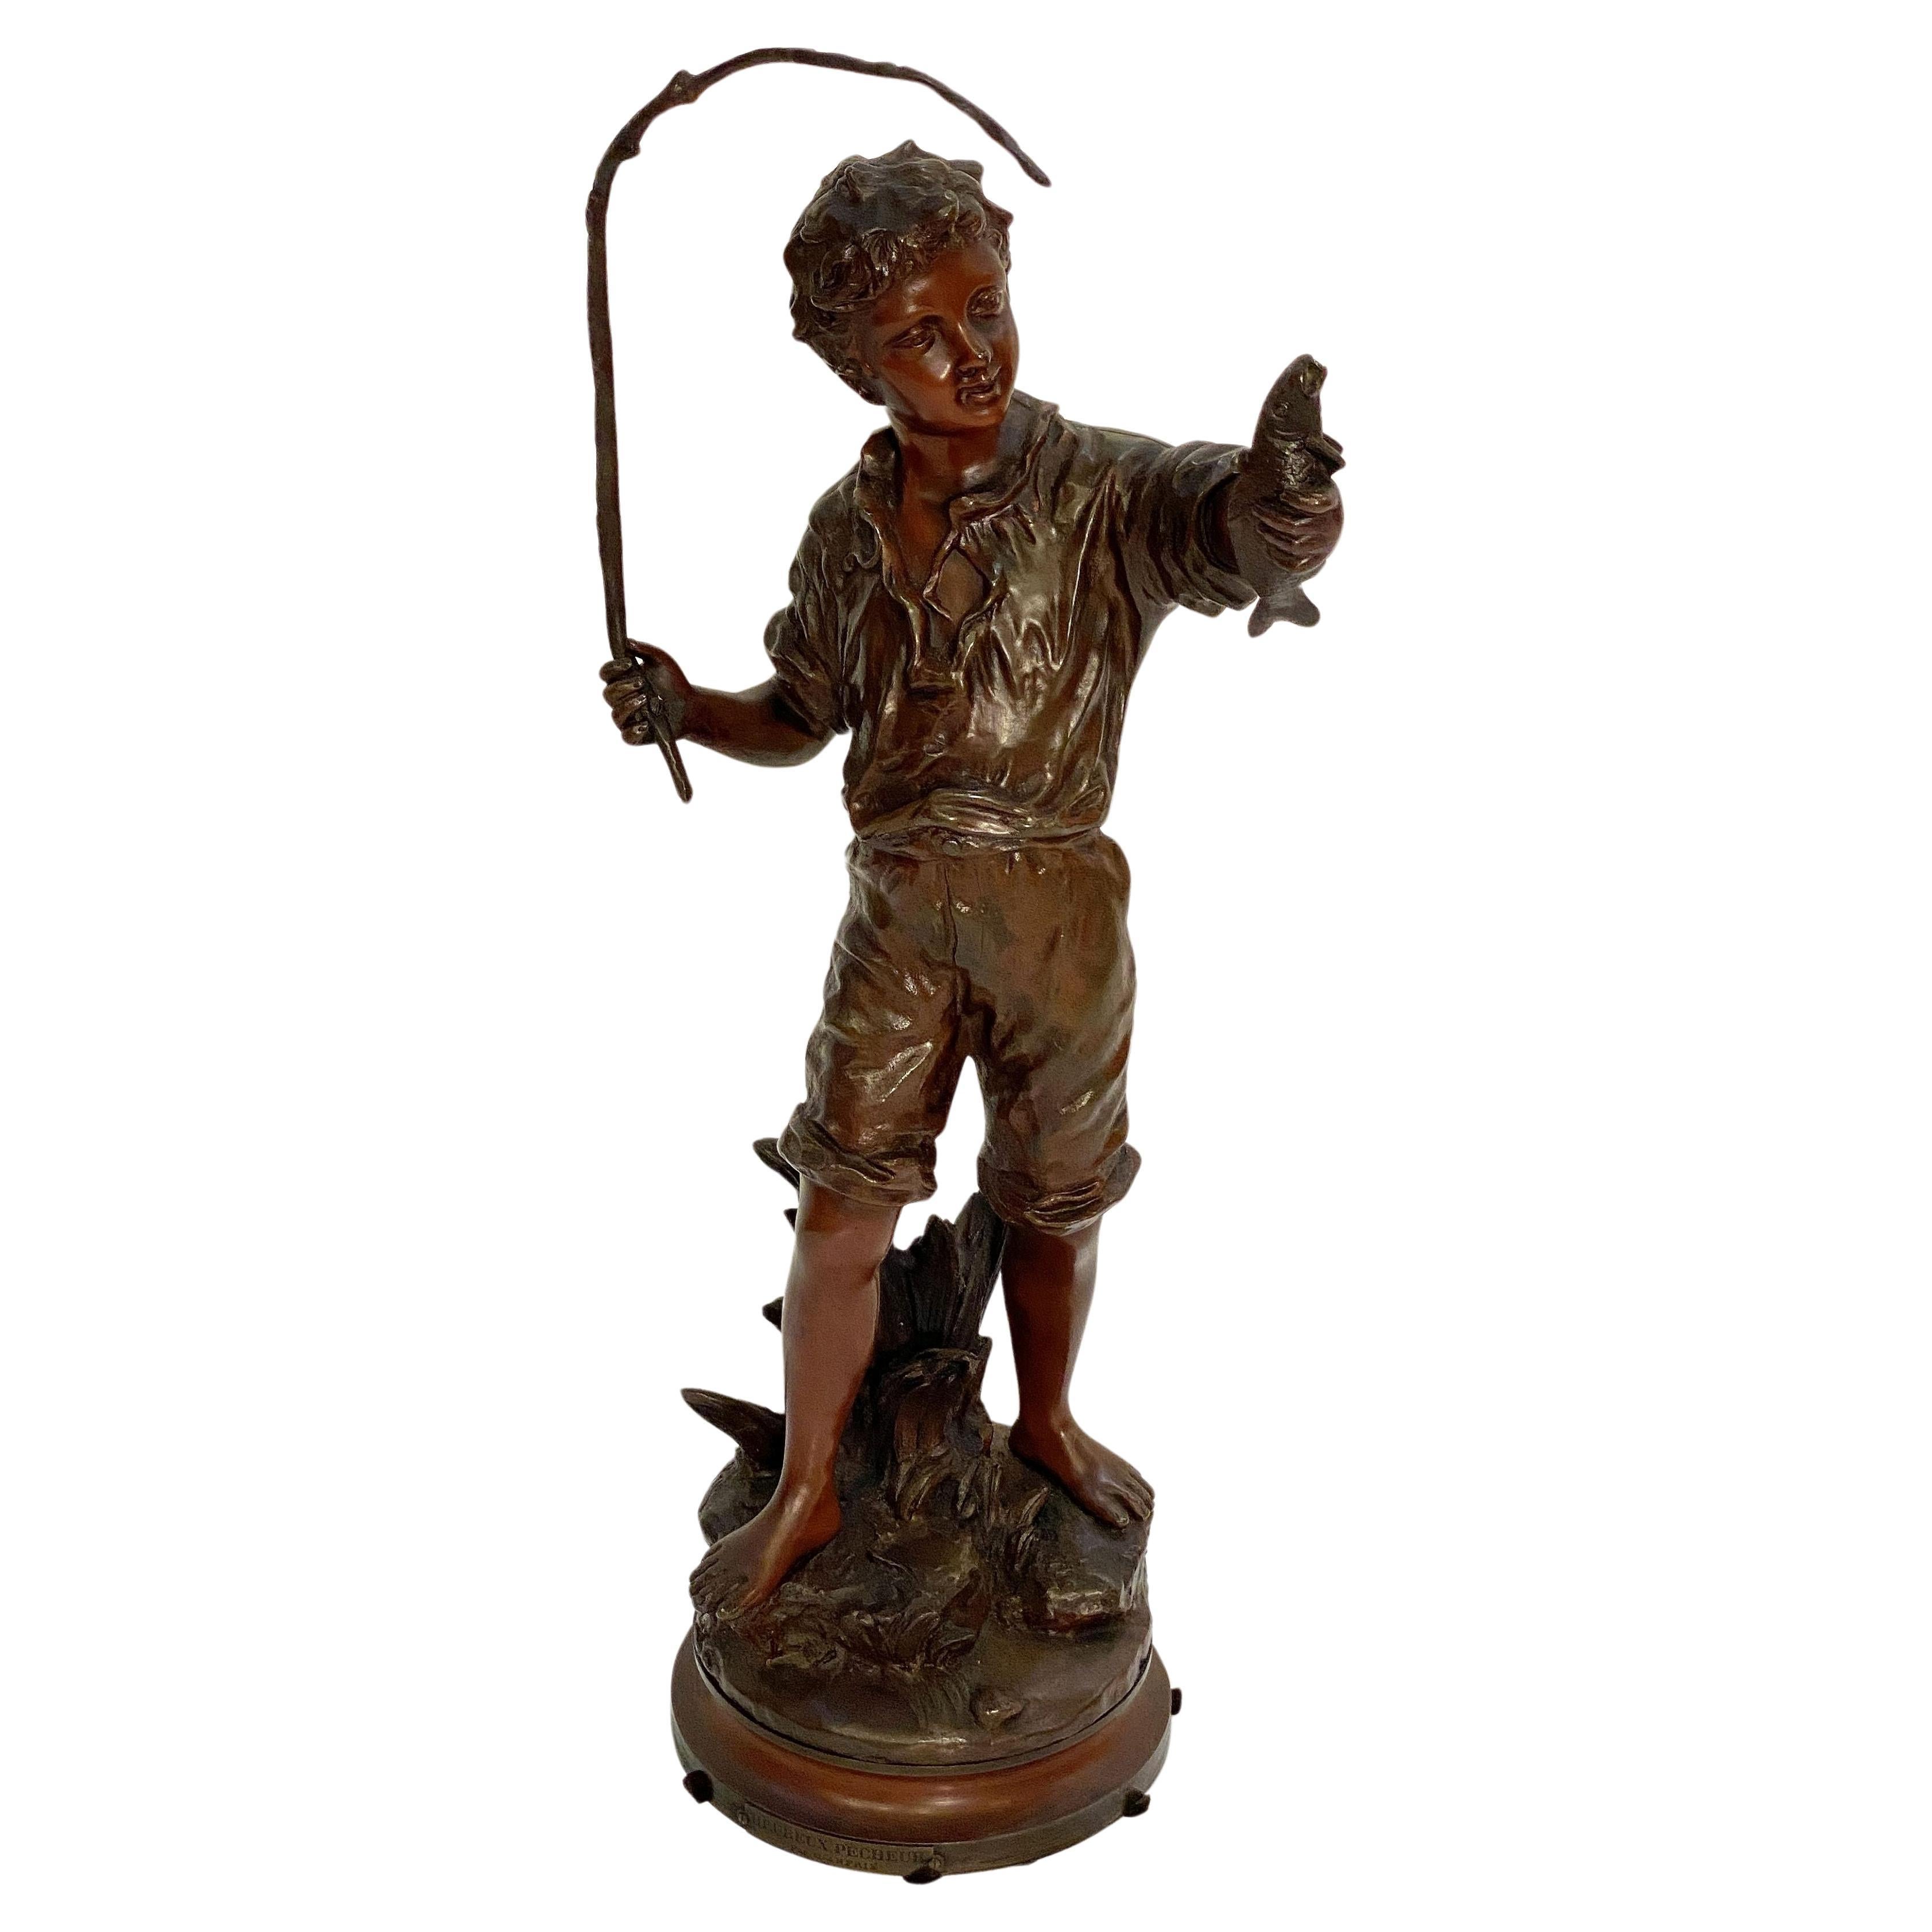 Heureux Pêcheur or Happy Fisherboy Bronze Sculptural Figure by Charles Anfrie 